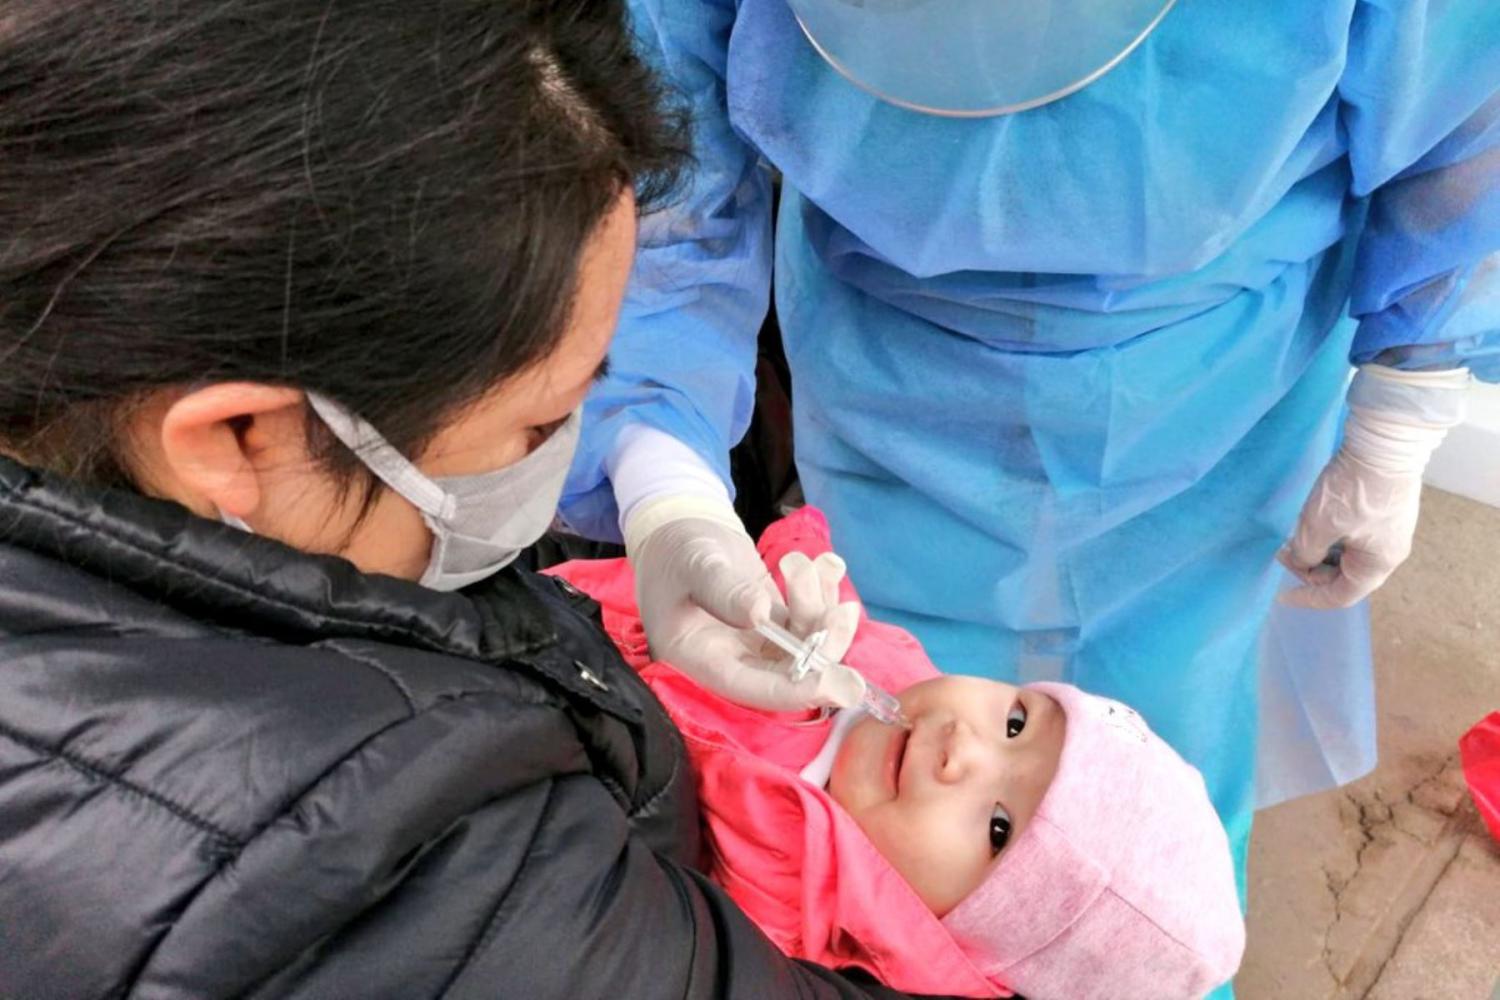 LOS OLIVOS, PERU- In the photos taken on July 10, 2020, teams from the Ministry of Health provide comprehensive health care to more than 300 children, pregnant women and older adults, prioritizing the regular vaccination scheme in Los Olivos, Peru.